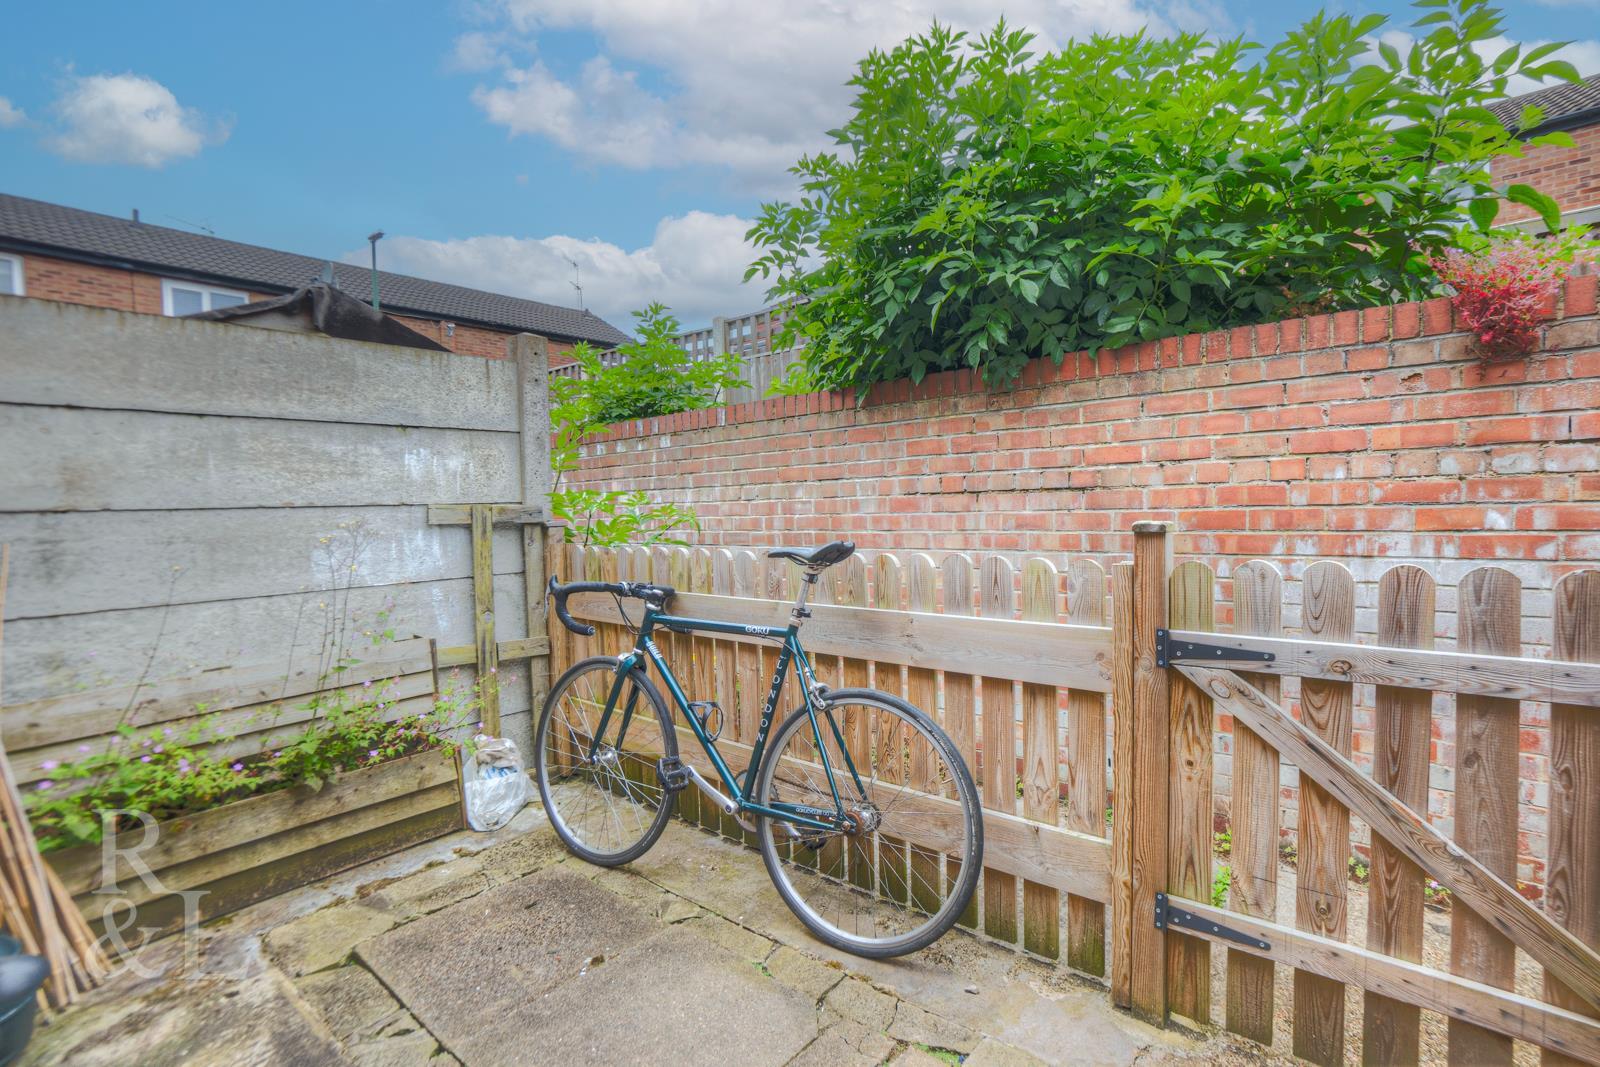 Property image for Lamcote Street, Meadows, Nottingham